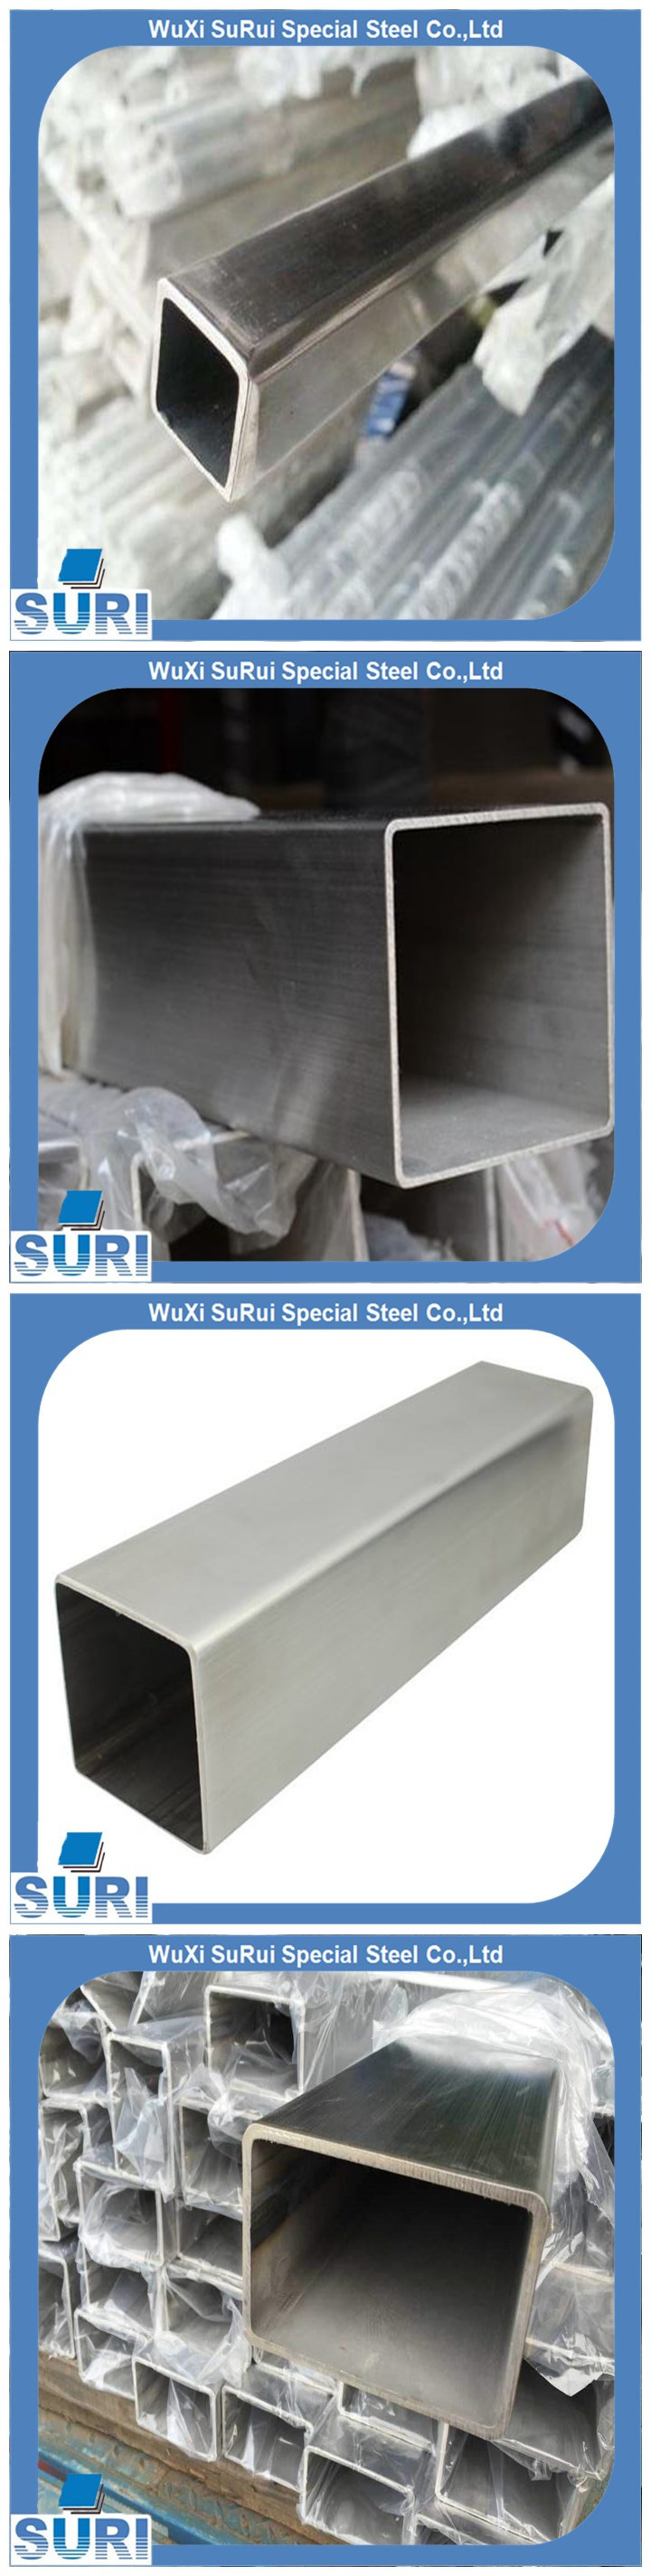 Factory Square Pipe Price Welded Stainless Steel Square Tube